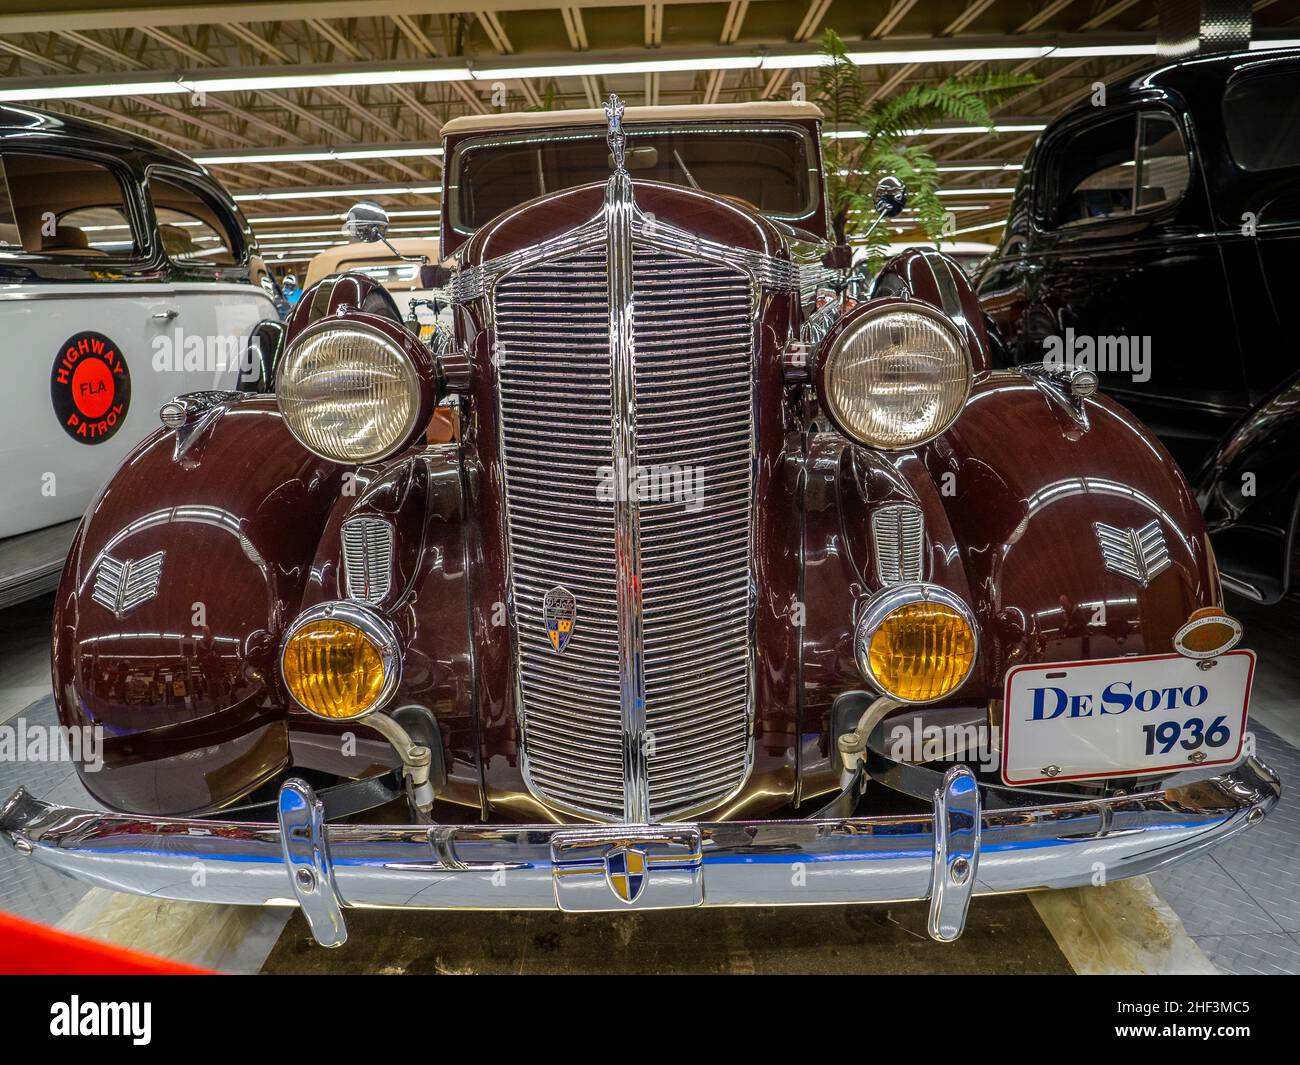 The Tallahassee Automobile Museum in Tallahassee Florida USA Stock Photo